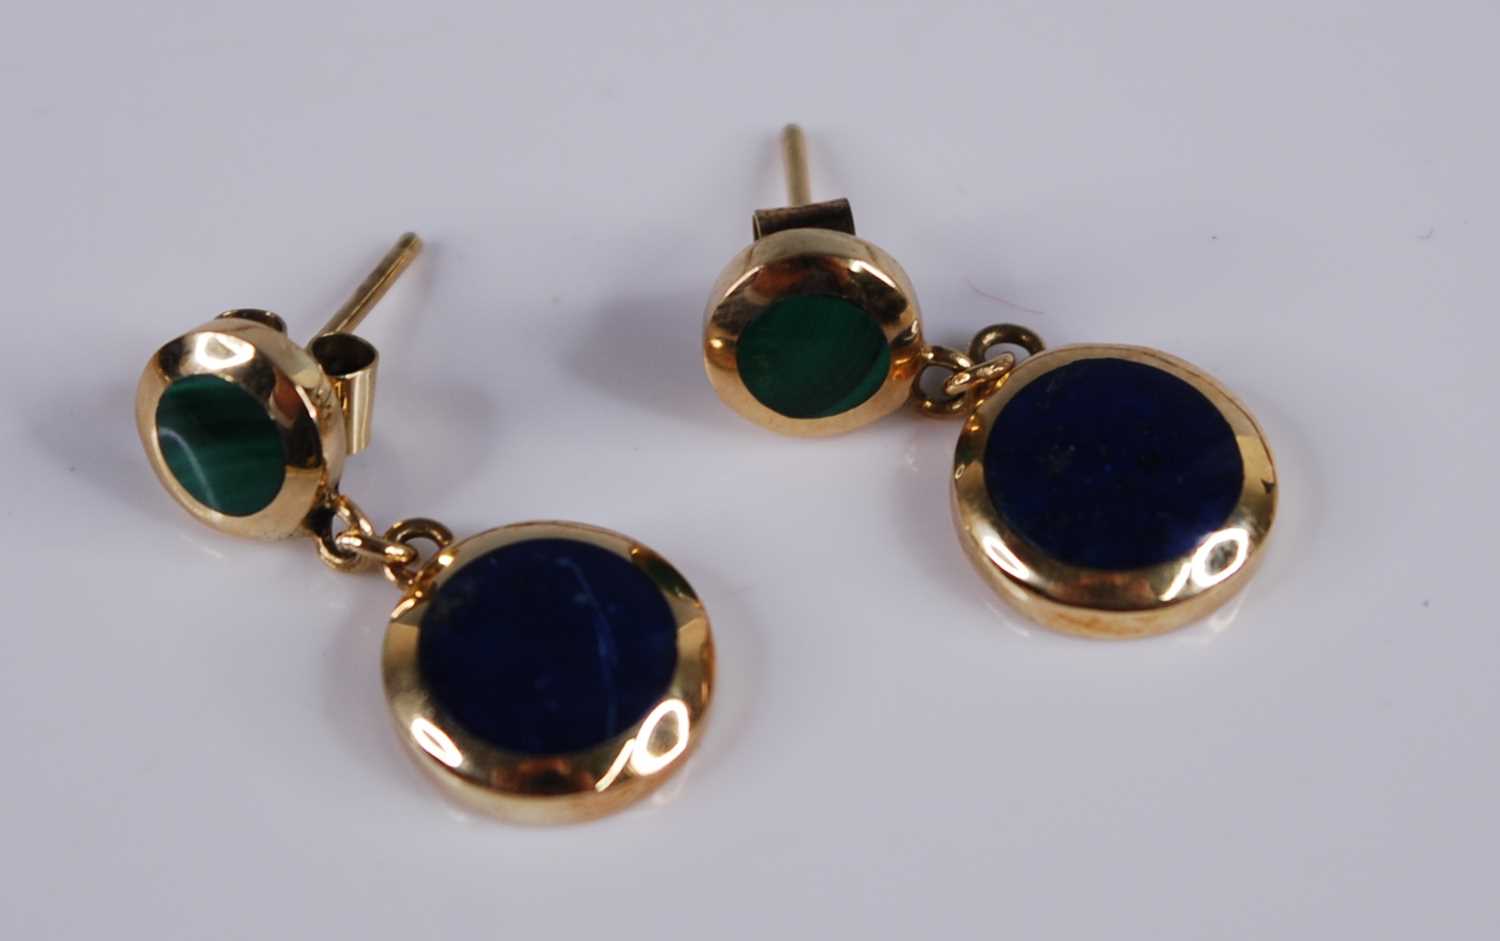 A Gundert of Chile 18ct yellow gold and lapis lazuli set necklace, arranged as alternating green and - Image 3 of 5